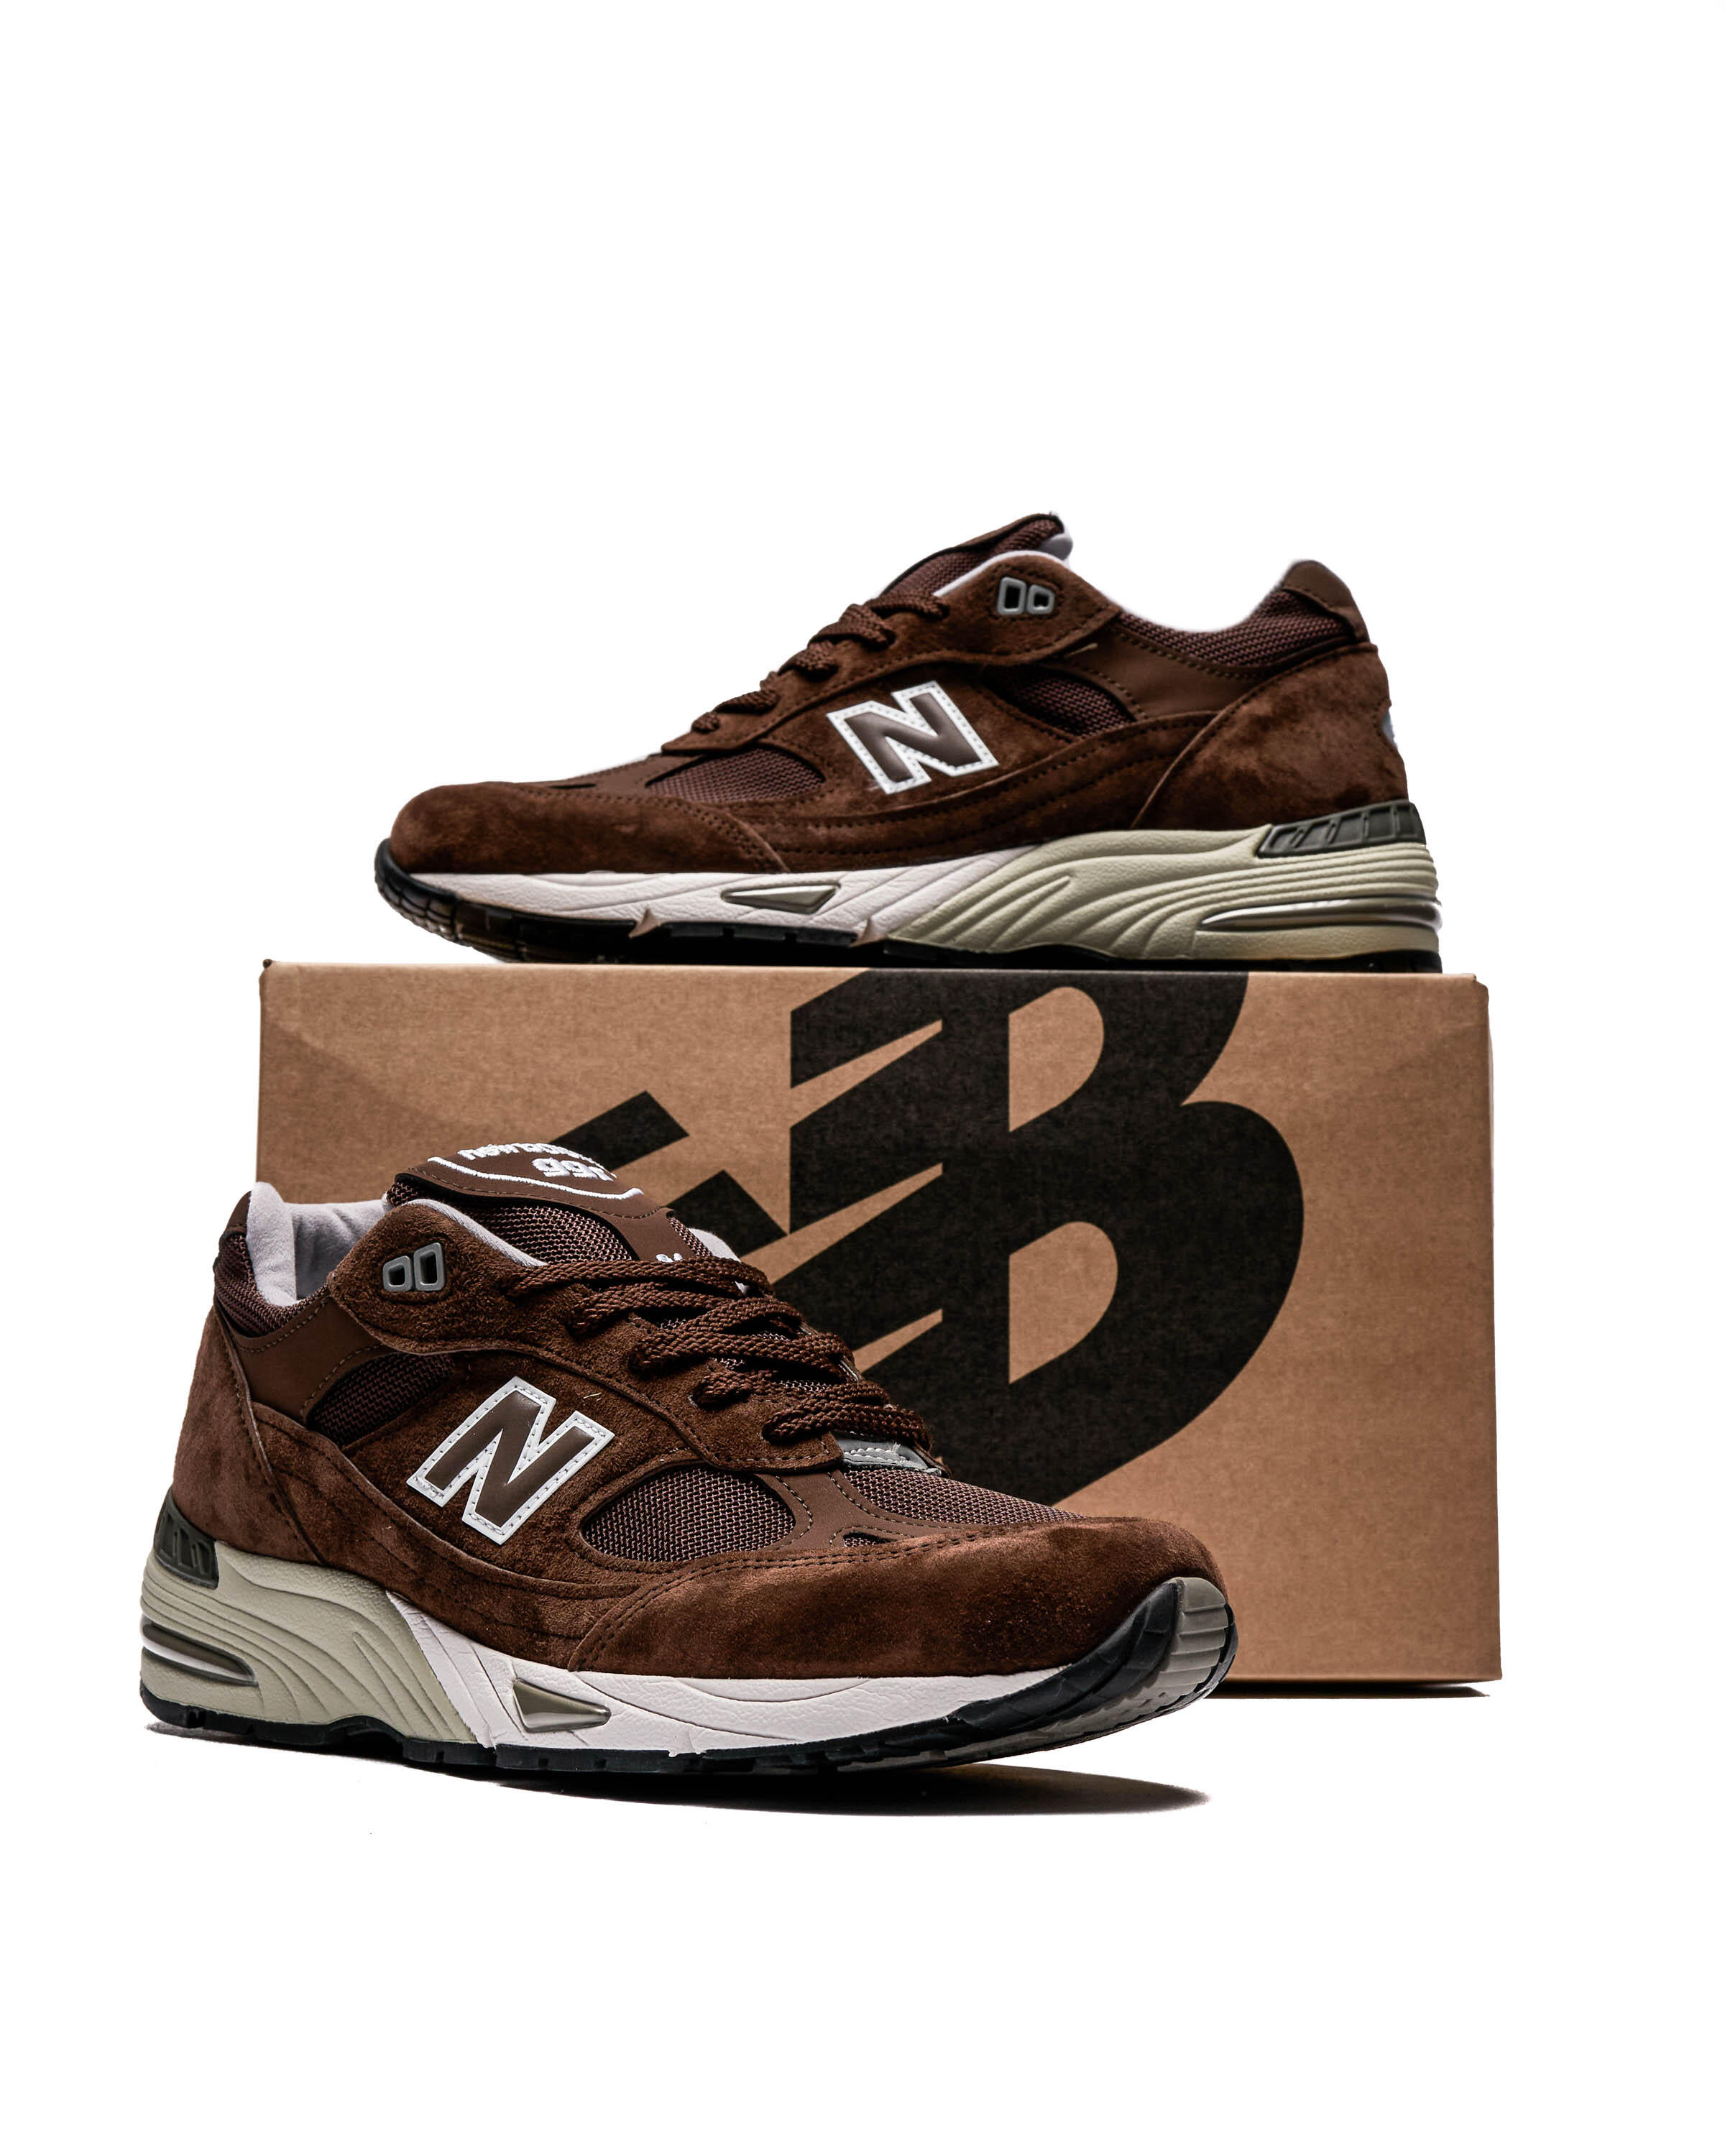 New Balance M 991 BGW 'Made in England'